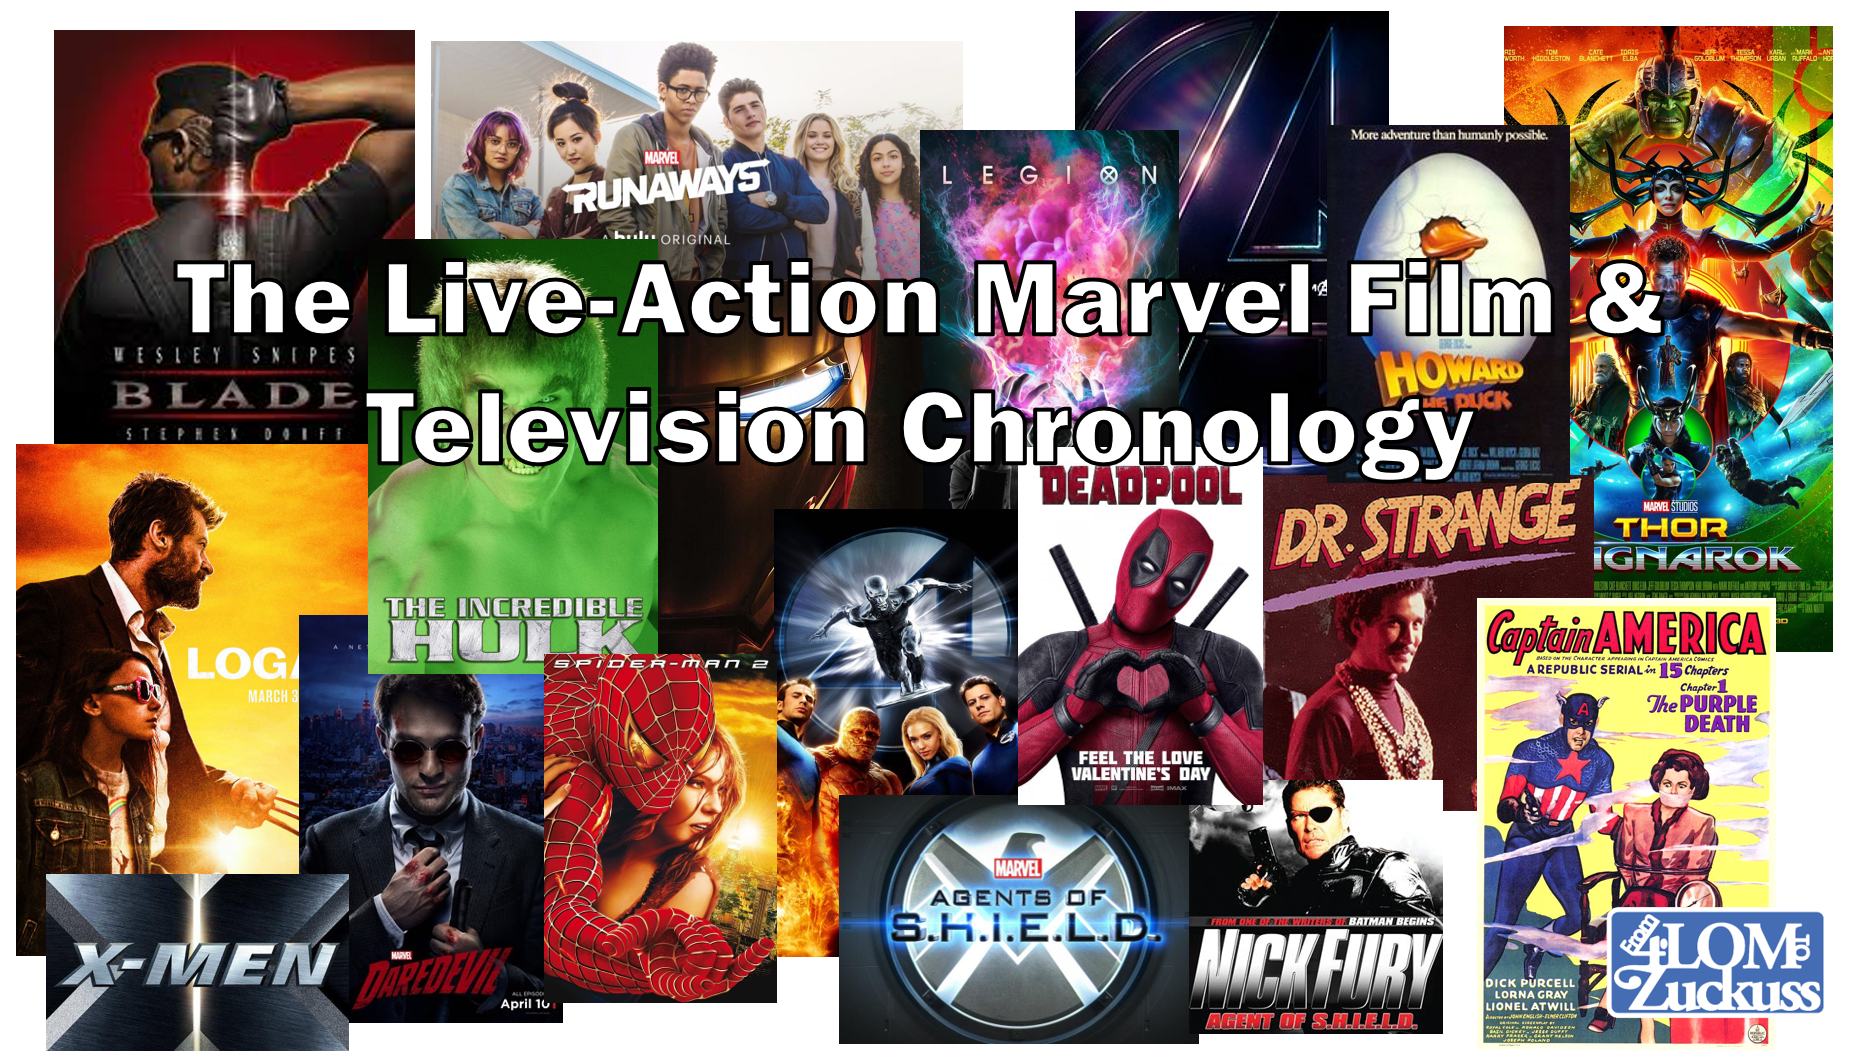 Marvel Film & Television Chronology – From 4-LOM to 